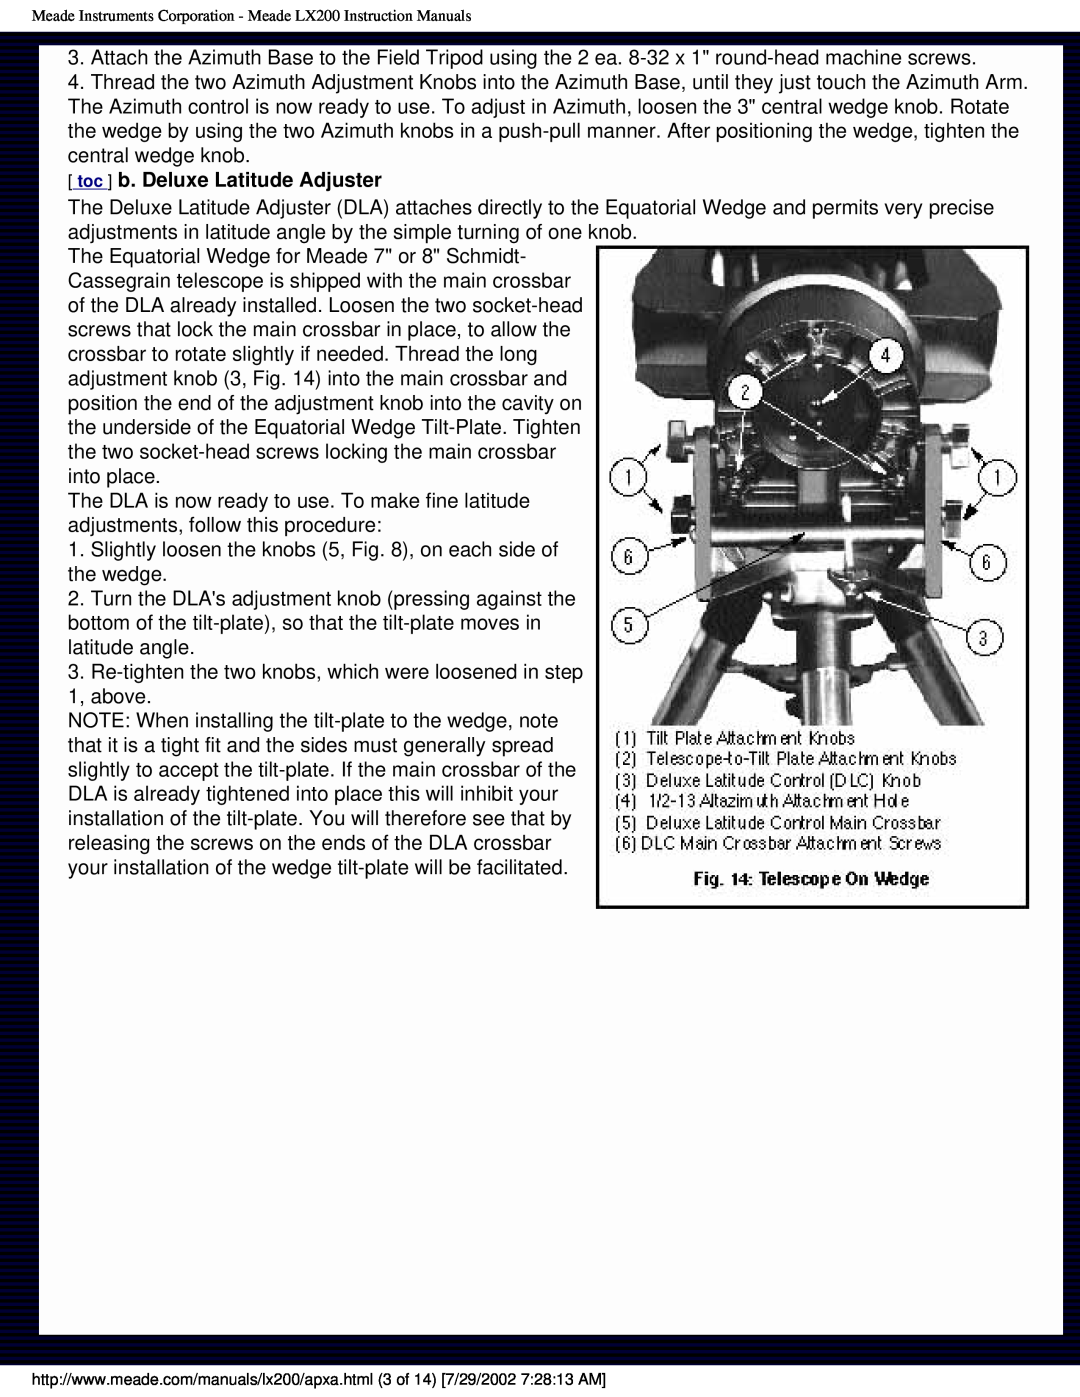 Meade LX200 instruction manual toc b. Deluxe Latitude Adjuster 